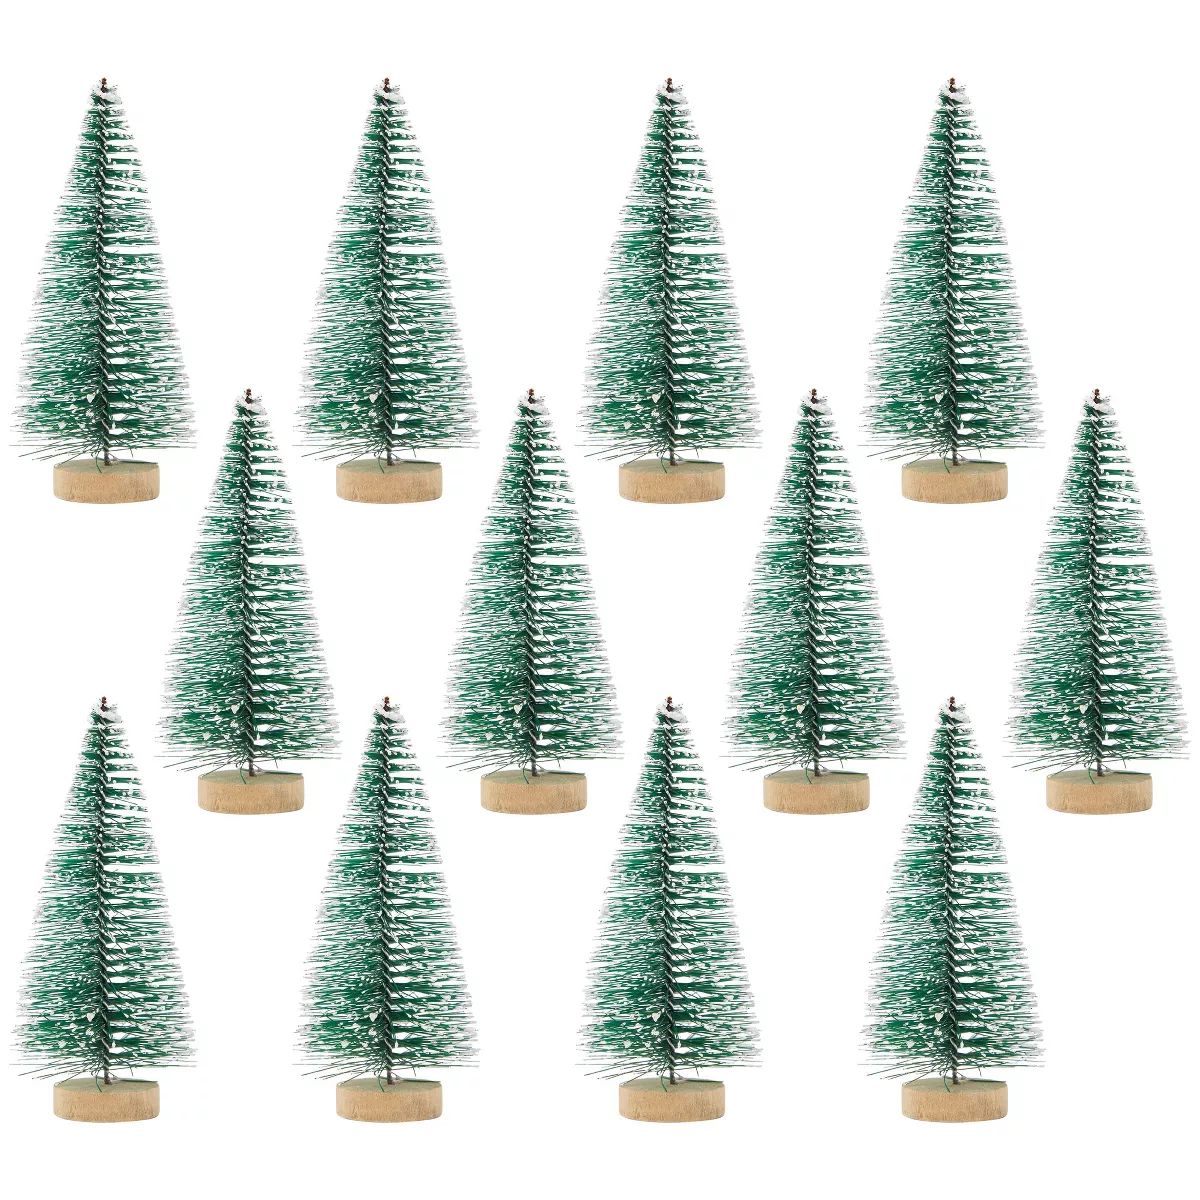 Juvale 12 Pack Mini Christmas Trees for Table Top Decorations, Holiday Decor, 4.25 x 2 Inches | Target